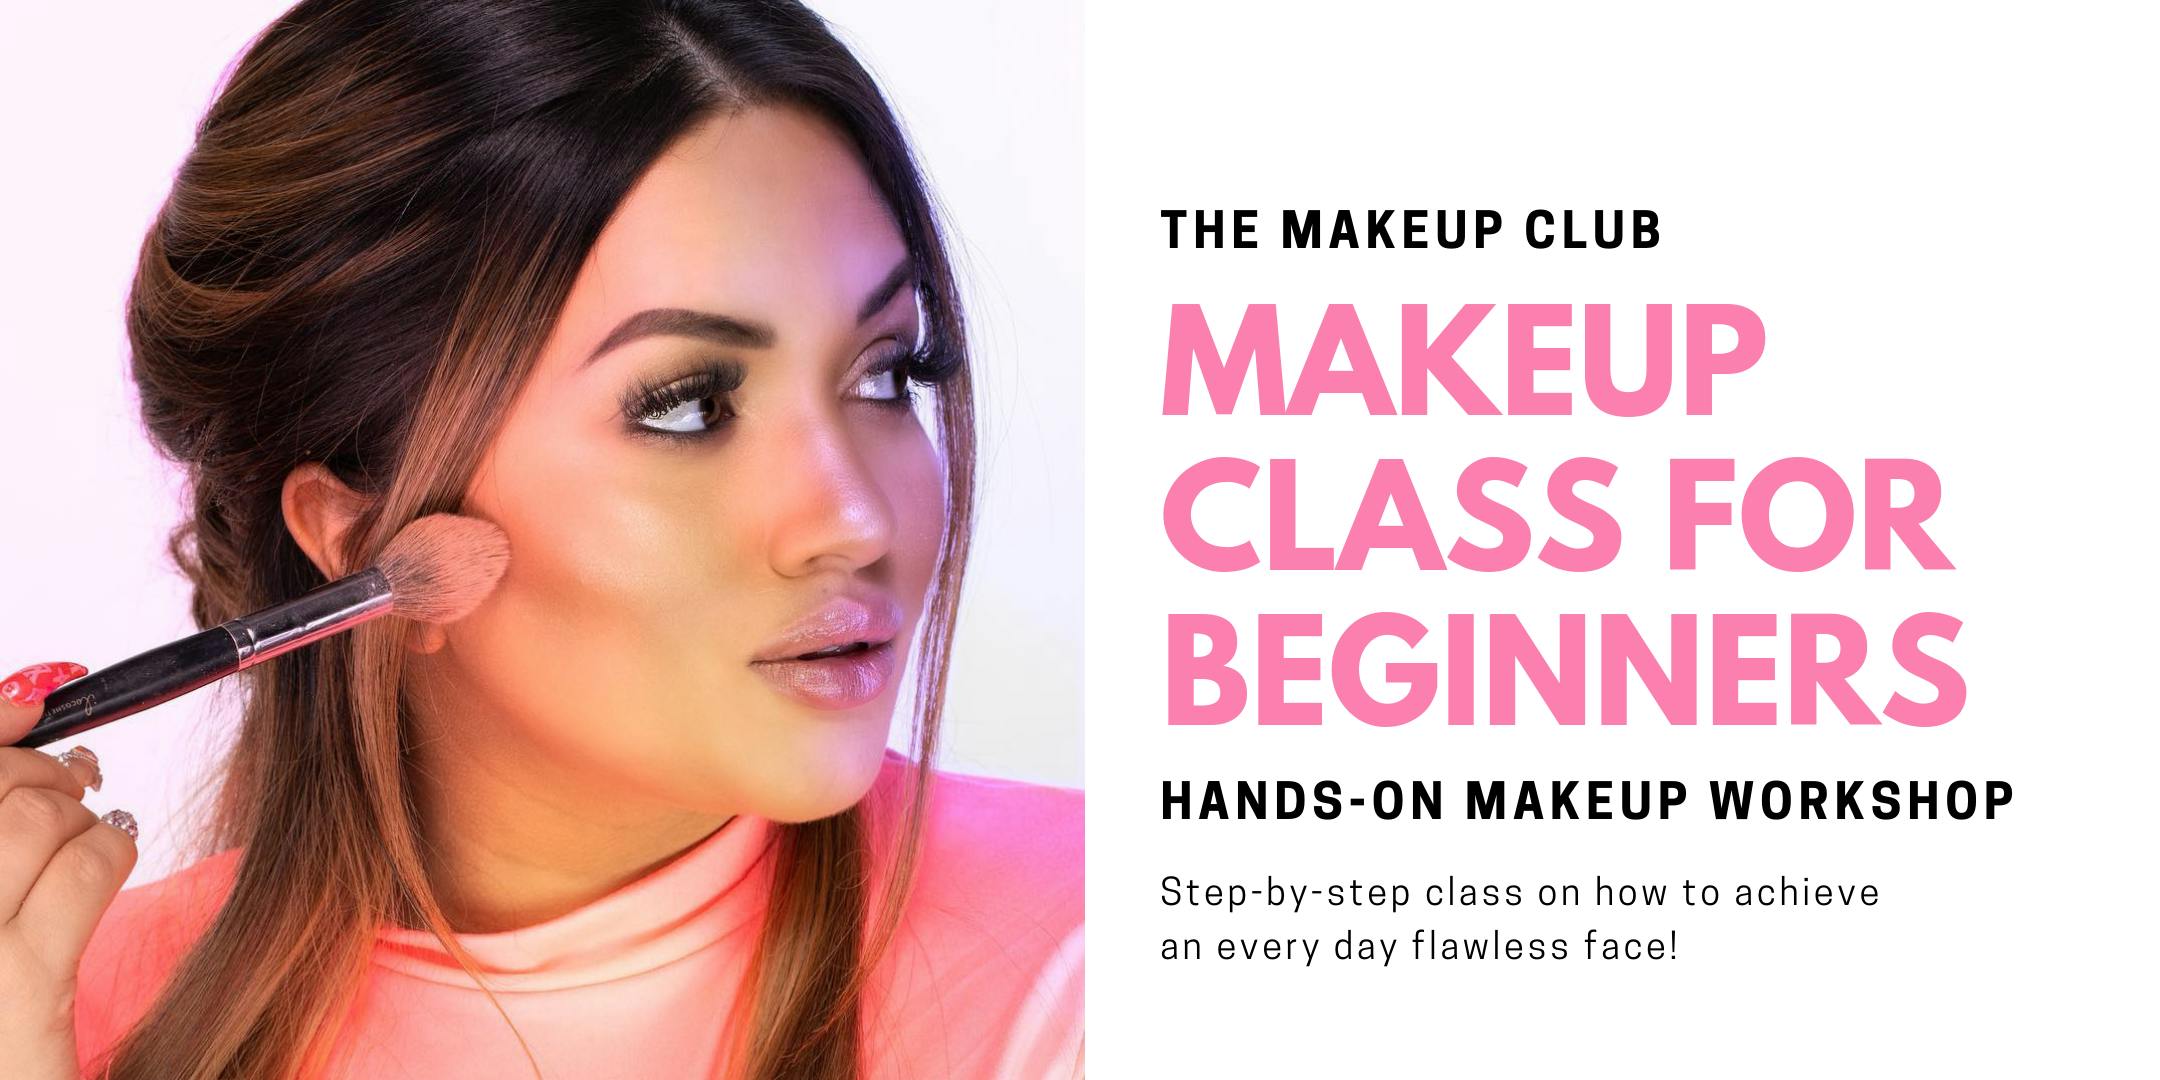 ALL ABOUT THE CANVAS: Beginner Makeup Workshop - 14 AUG 2019